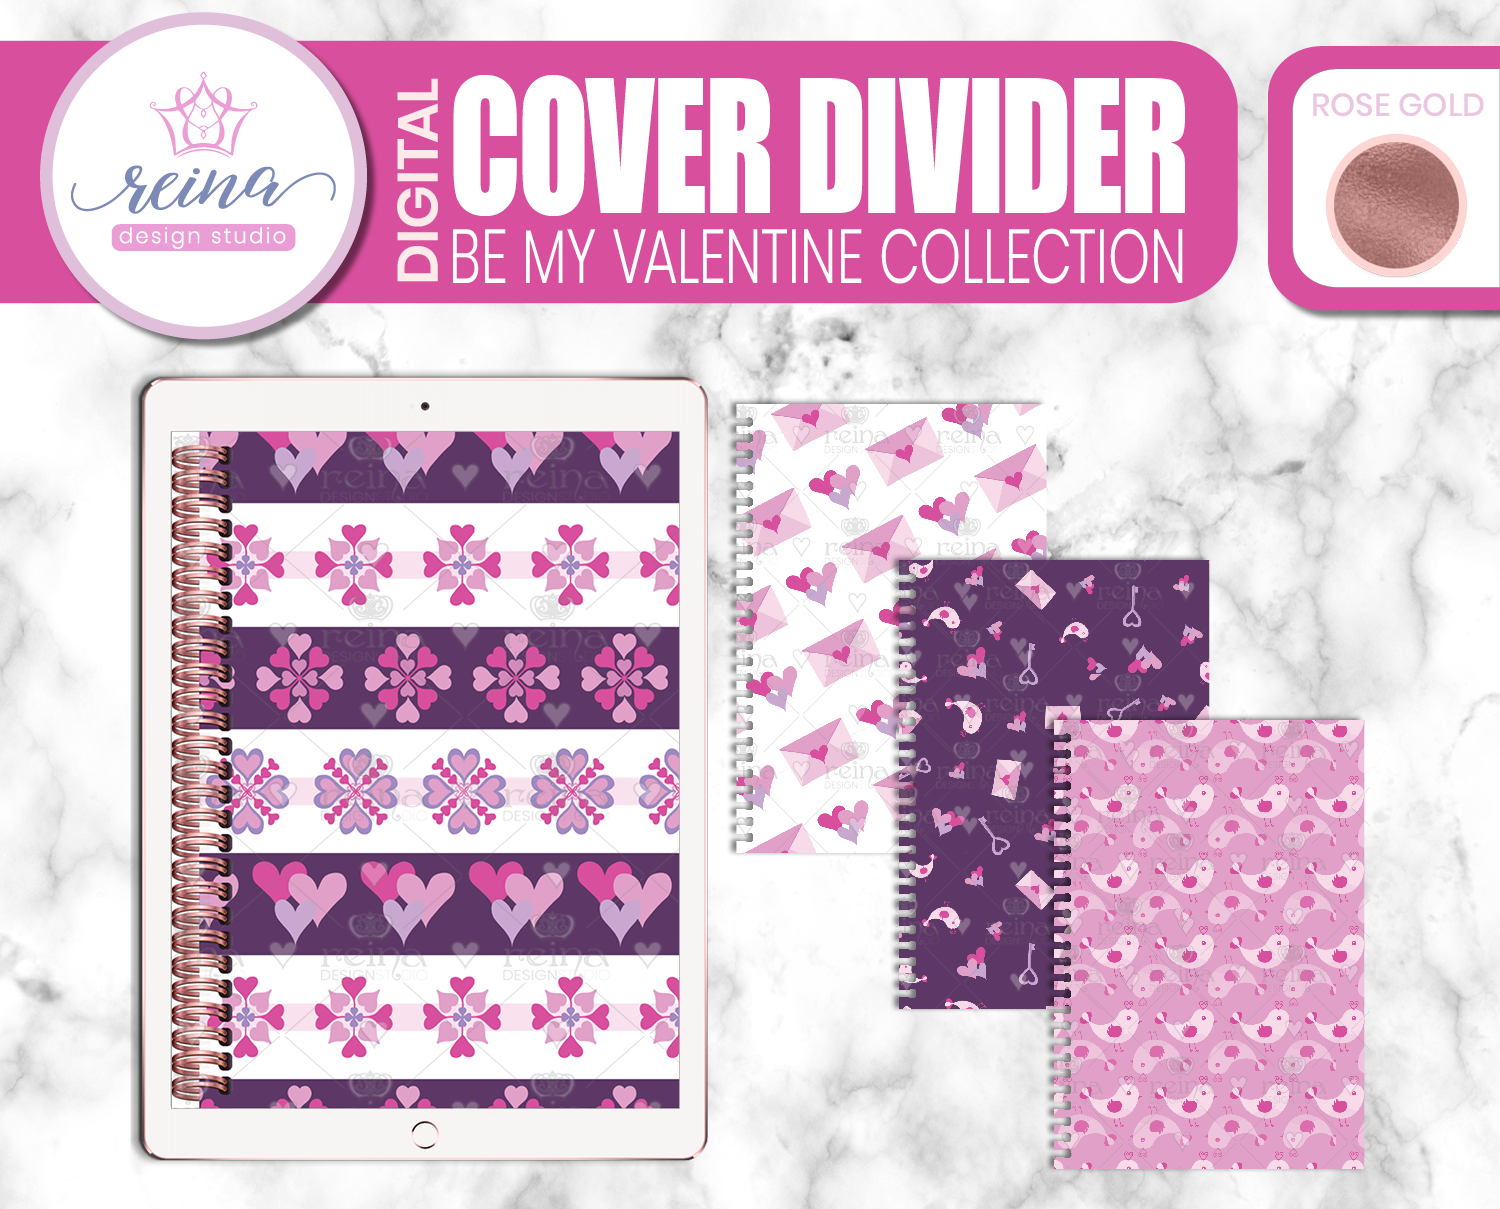 Interchangeable Digital Planner Cover and Dividers Deluxe | Be My Valentine Set B, Rose Gold